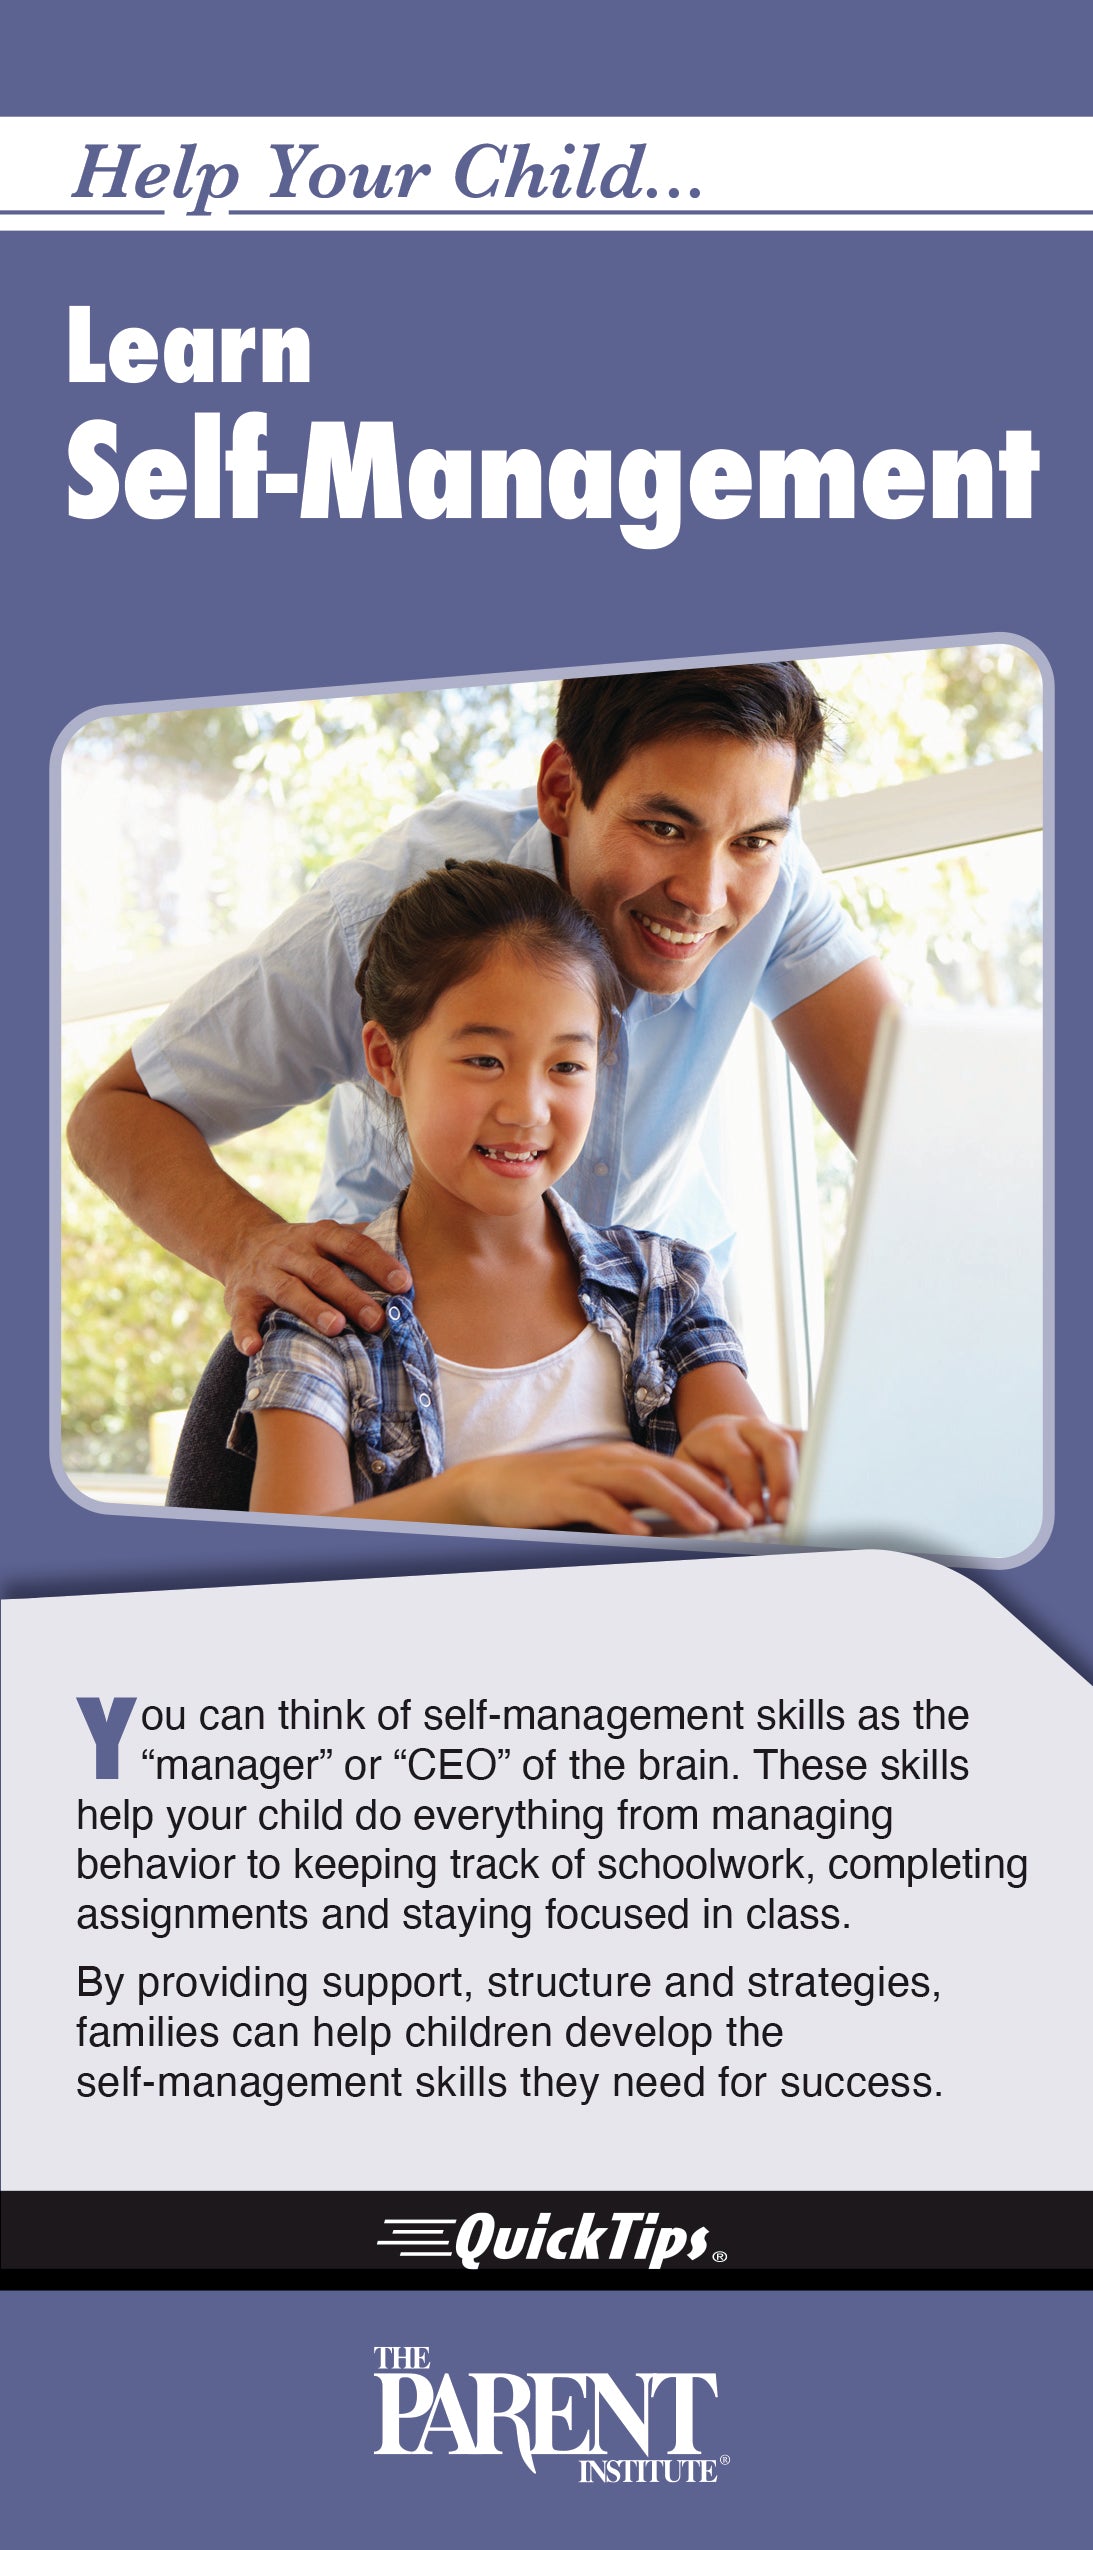 Help Your Child Learn Self-Management (Electronic)